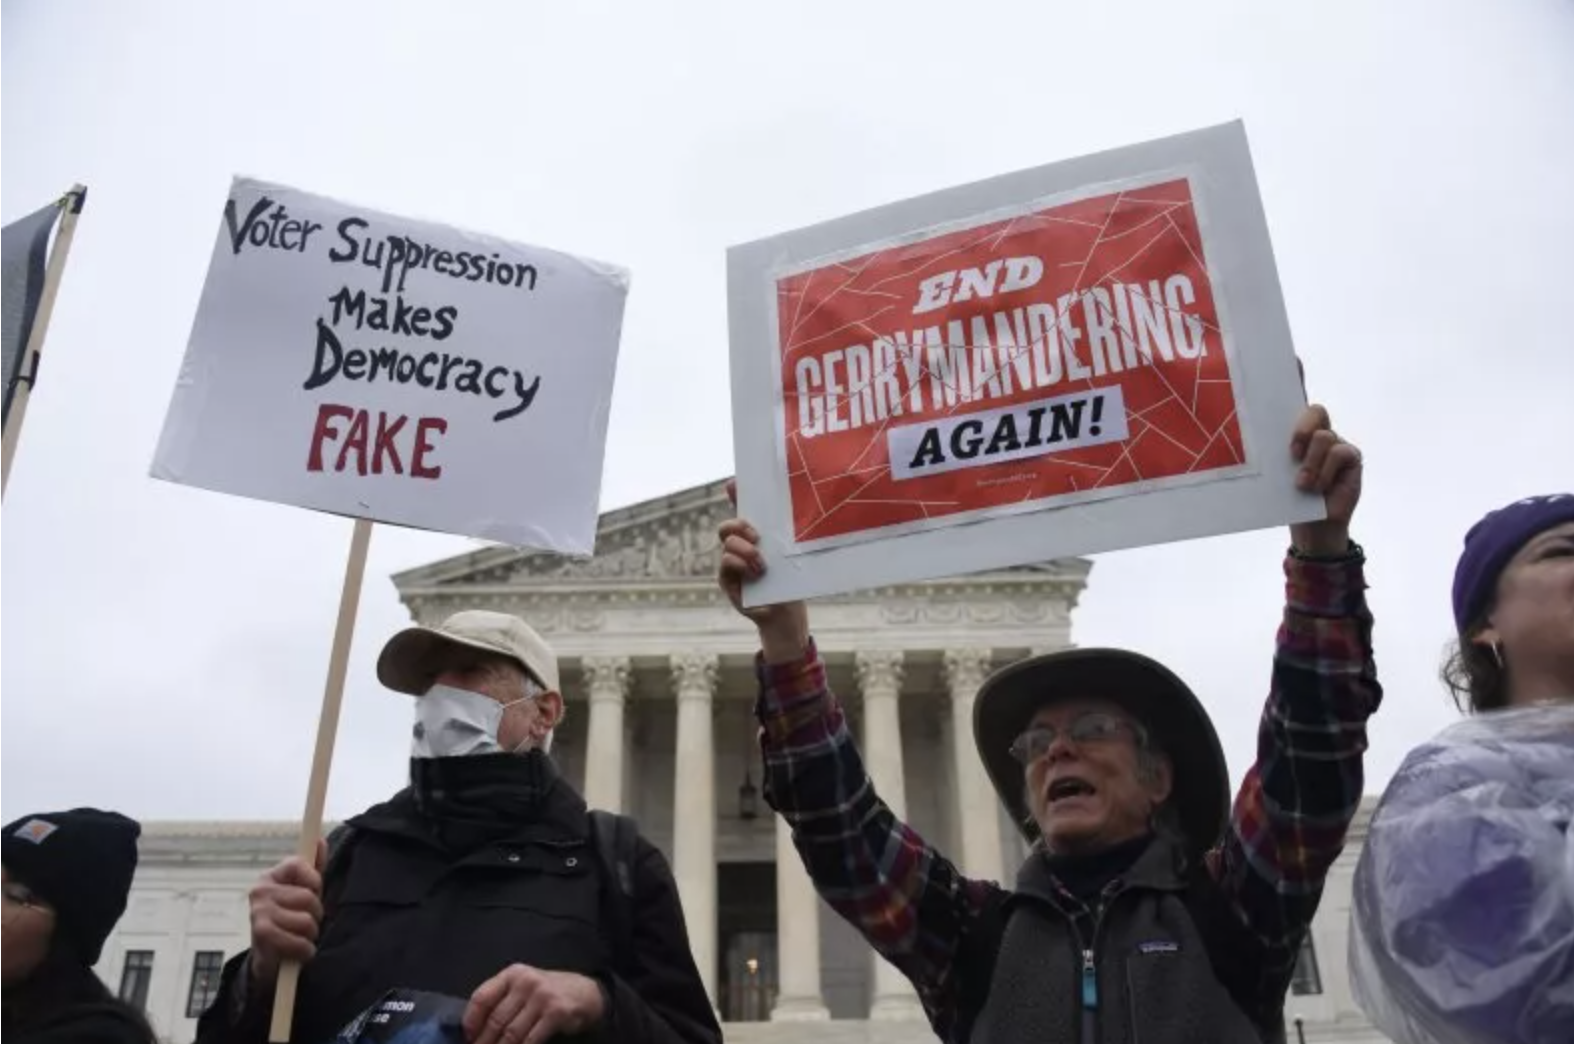 The US Supreme Court heard arguments in Moore v. Harper, a case that could fundamentally alter the way democracy operates in America, by expanding the power of state legislatures over elections for the White House and Congress. OLIVIER DOULIERY/AFP VIA GETTY IMAGES